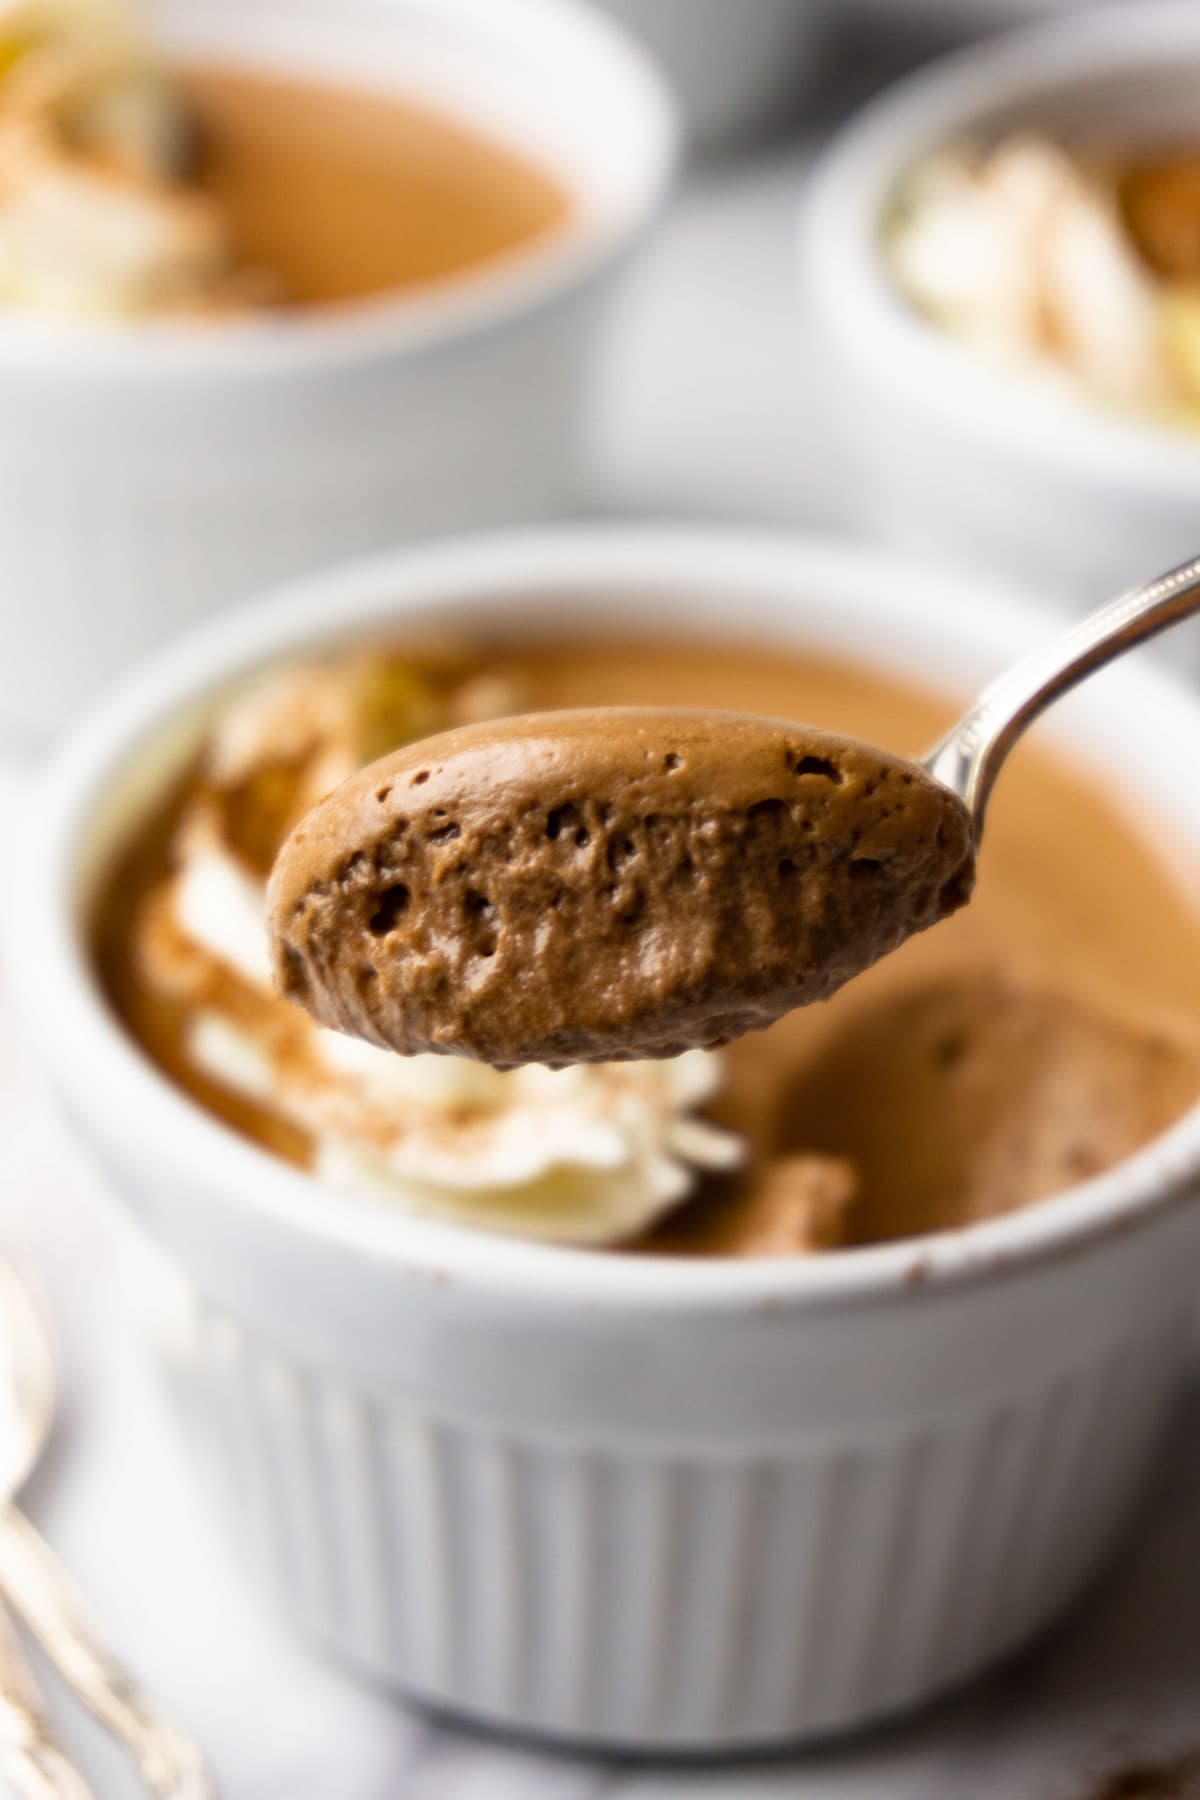 A silver spoon with chocolate mousse, ramekin with the mousse on the background.